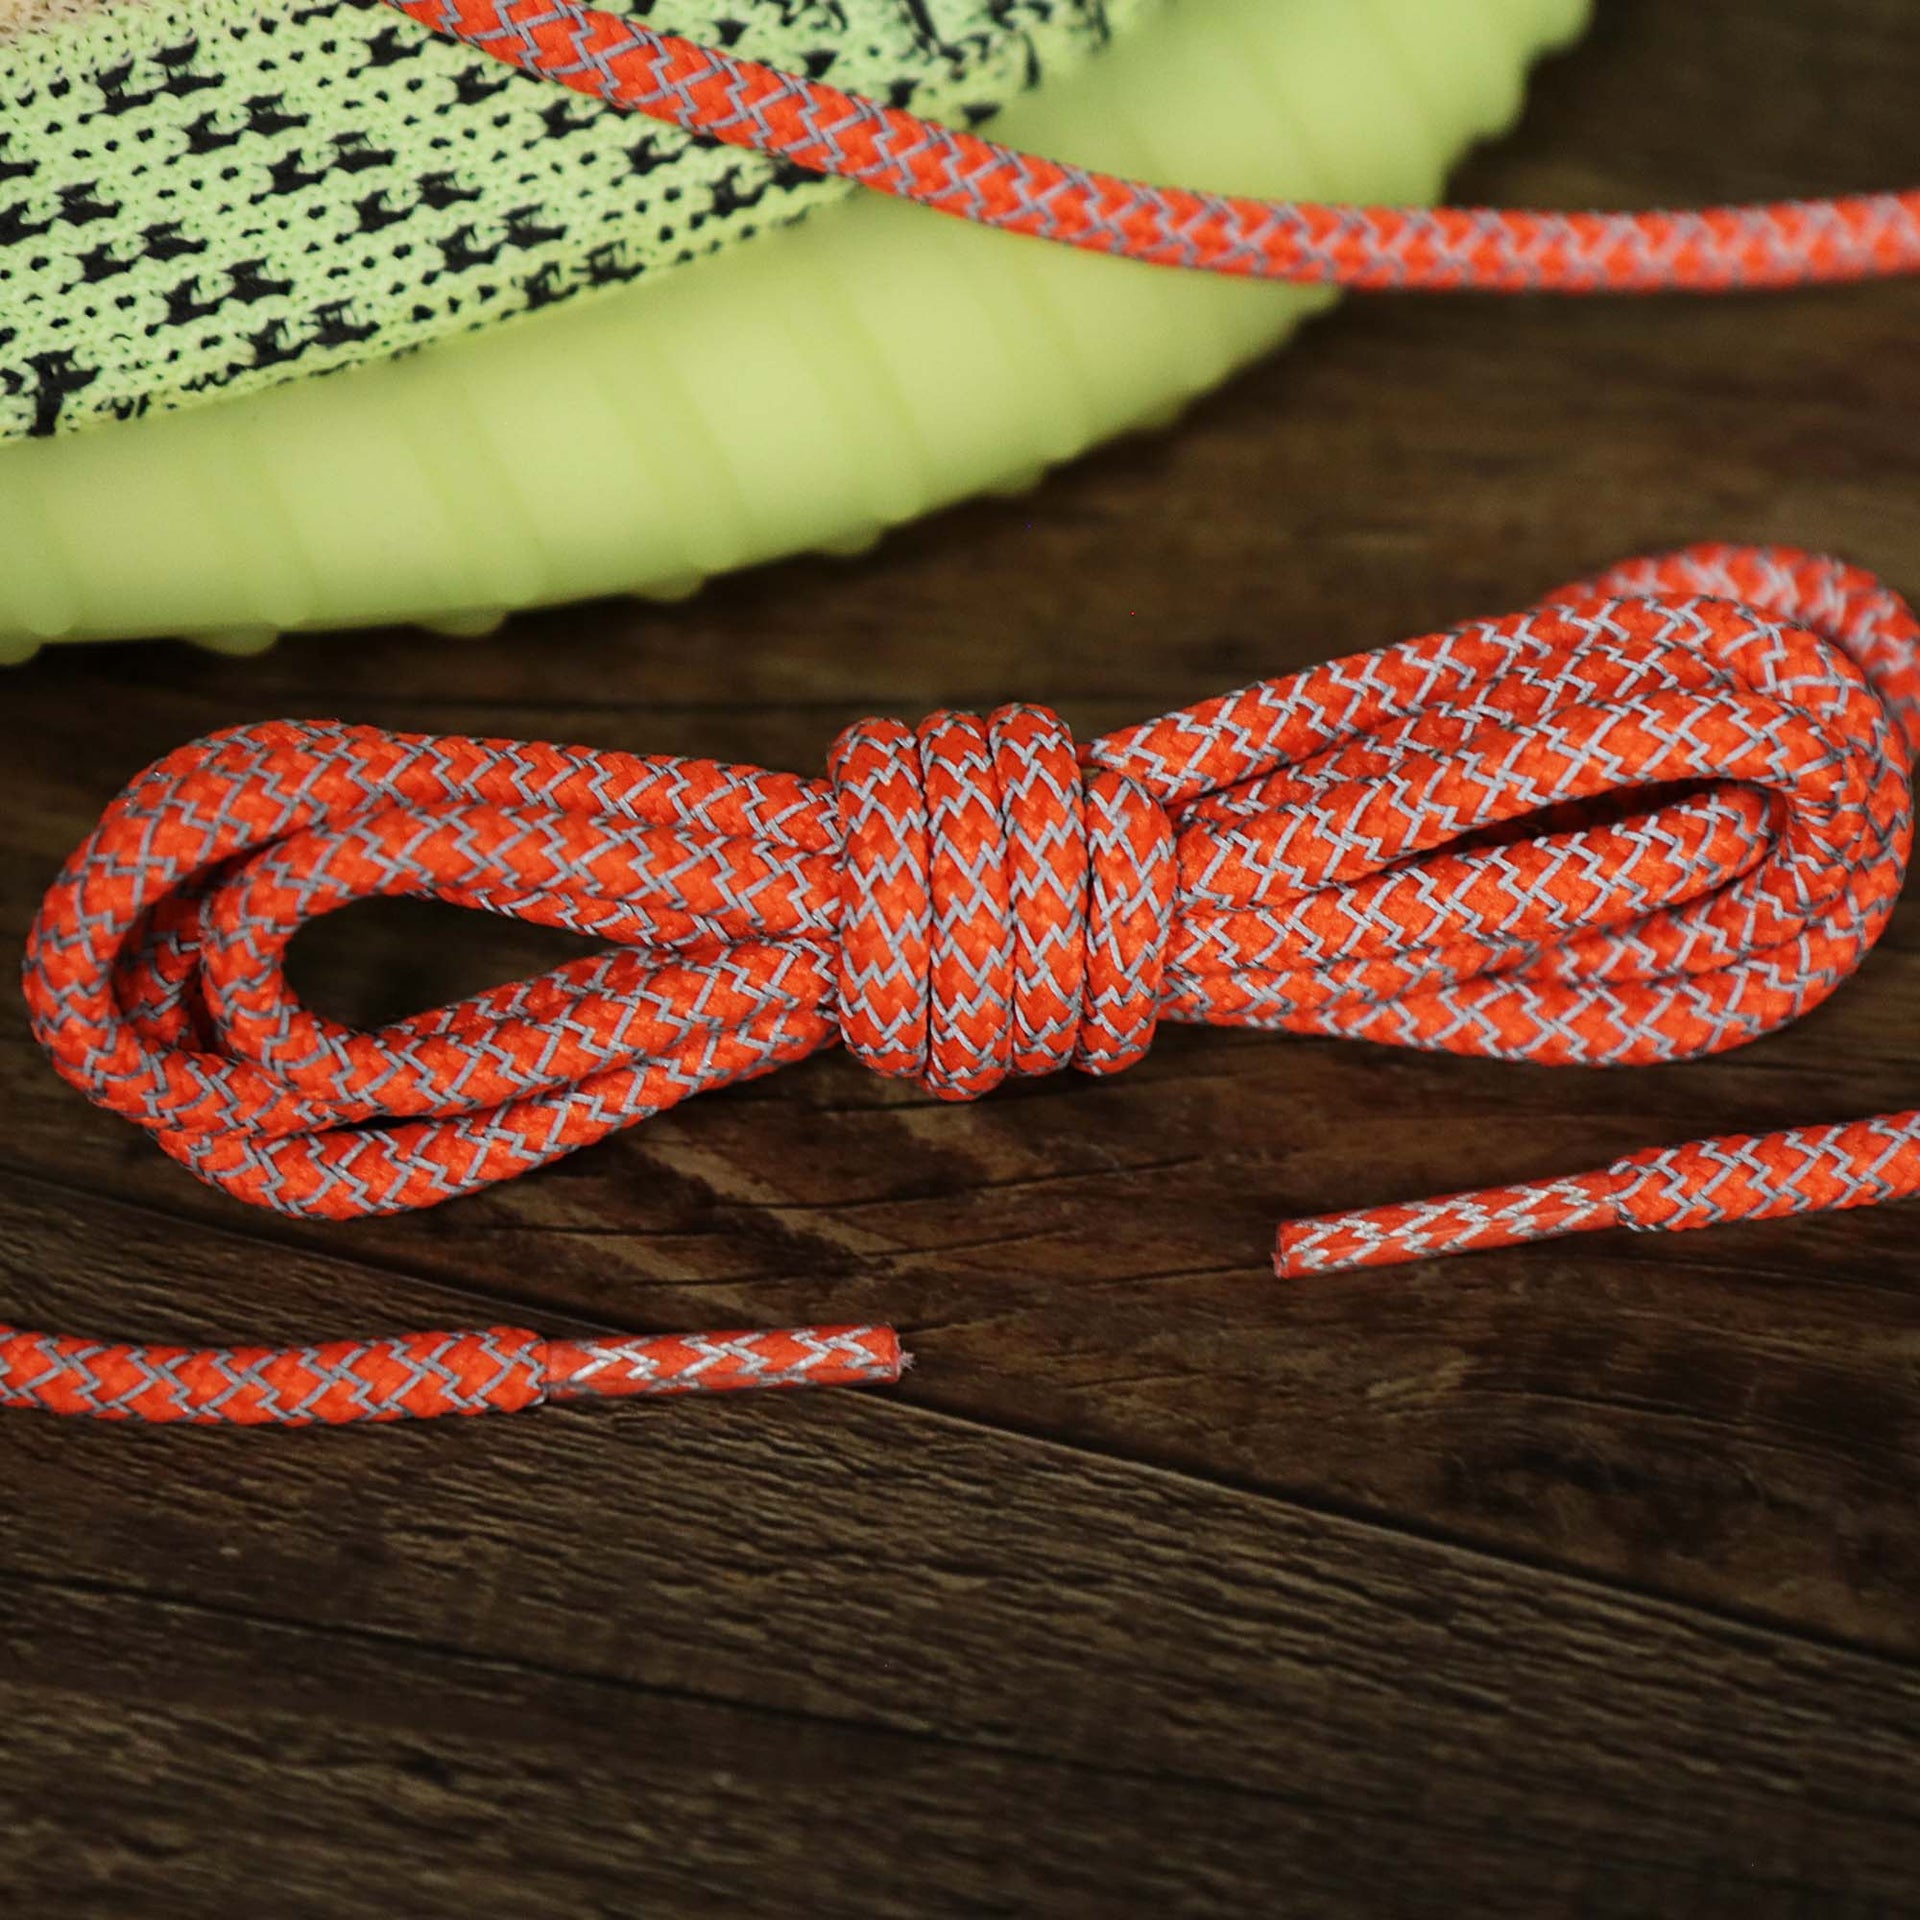 The 3M Reflective Orange Solid Shoelaces with Orange Aglets | 120cm Capswag reflective and unfolded